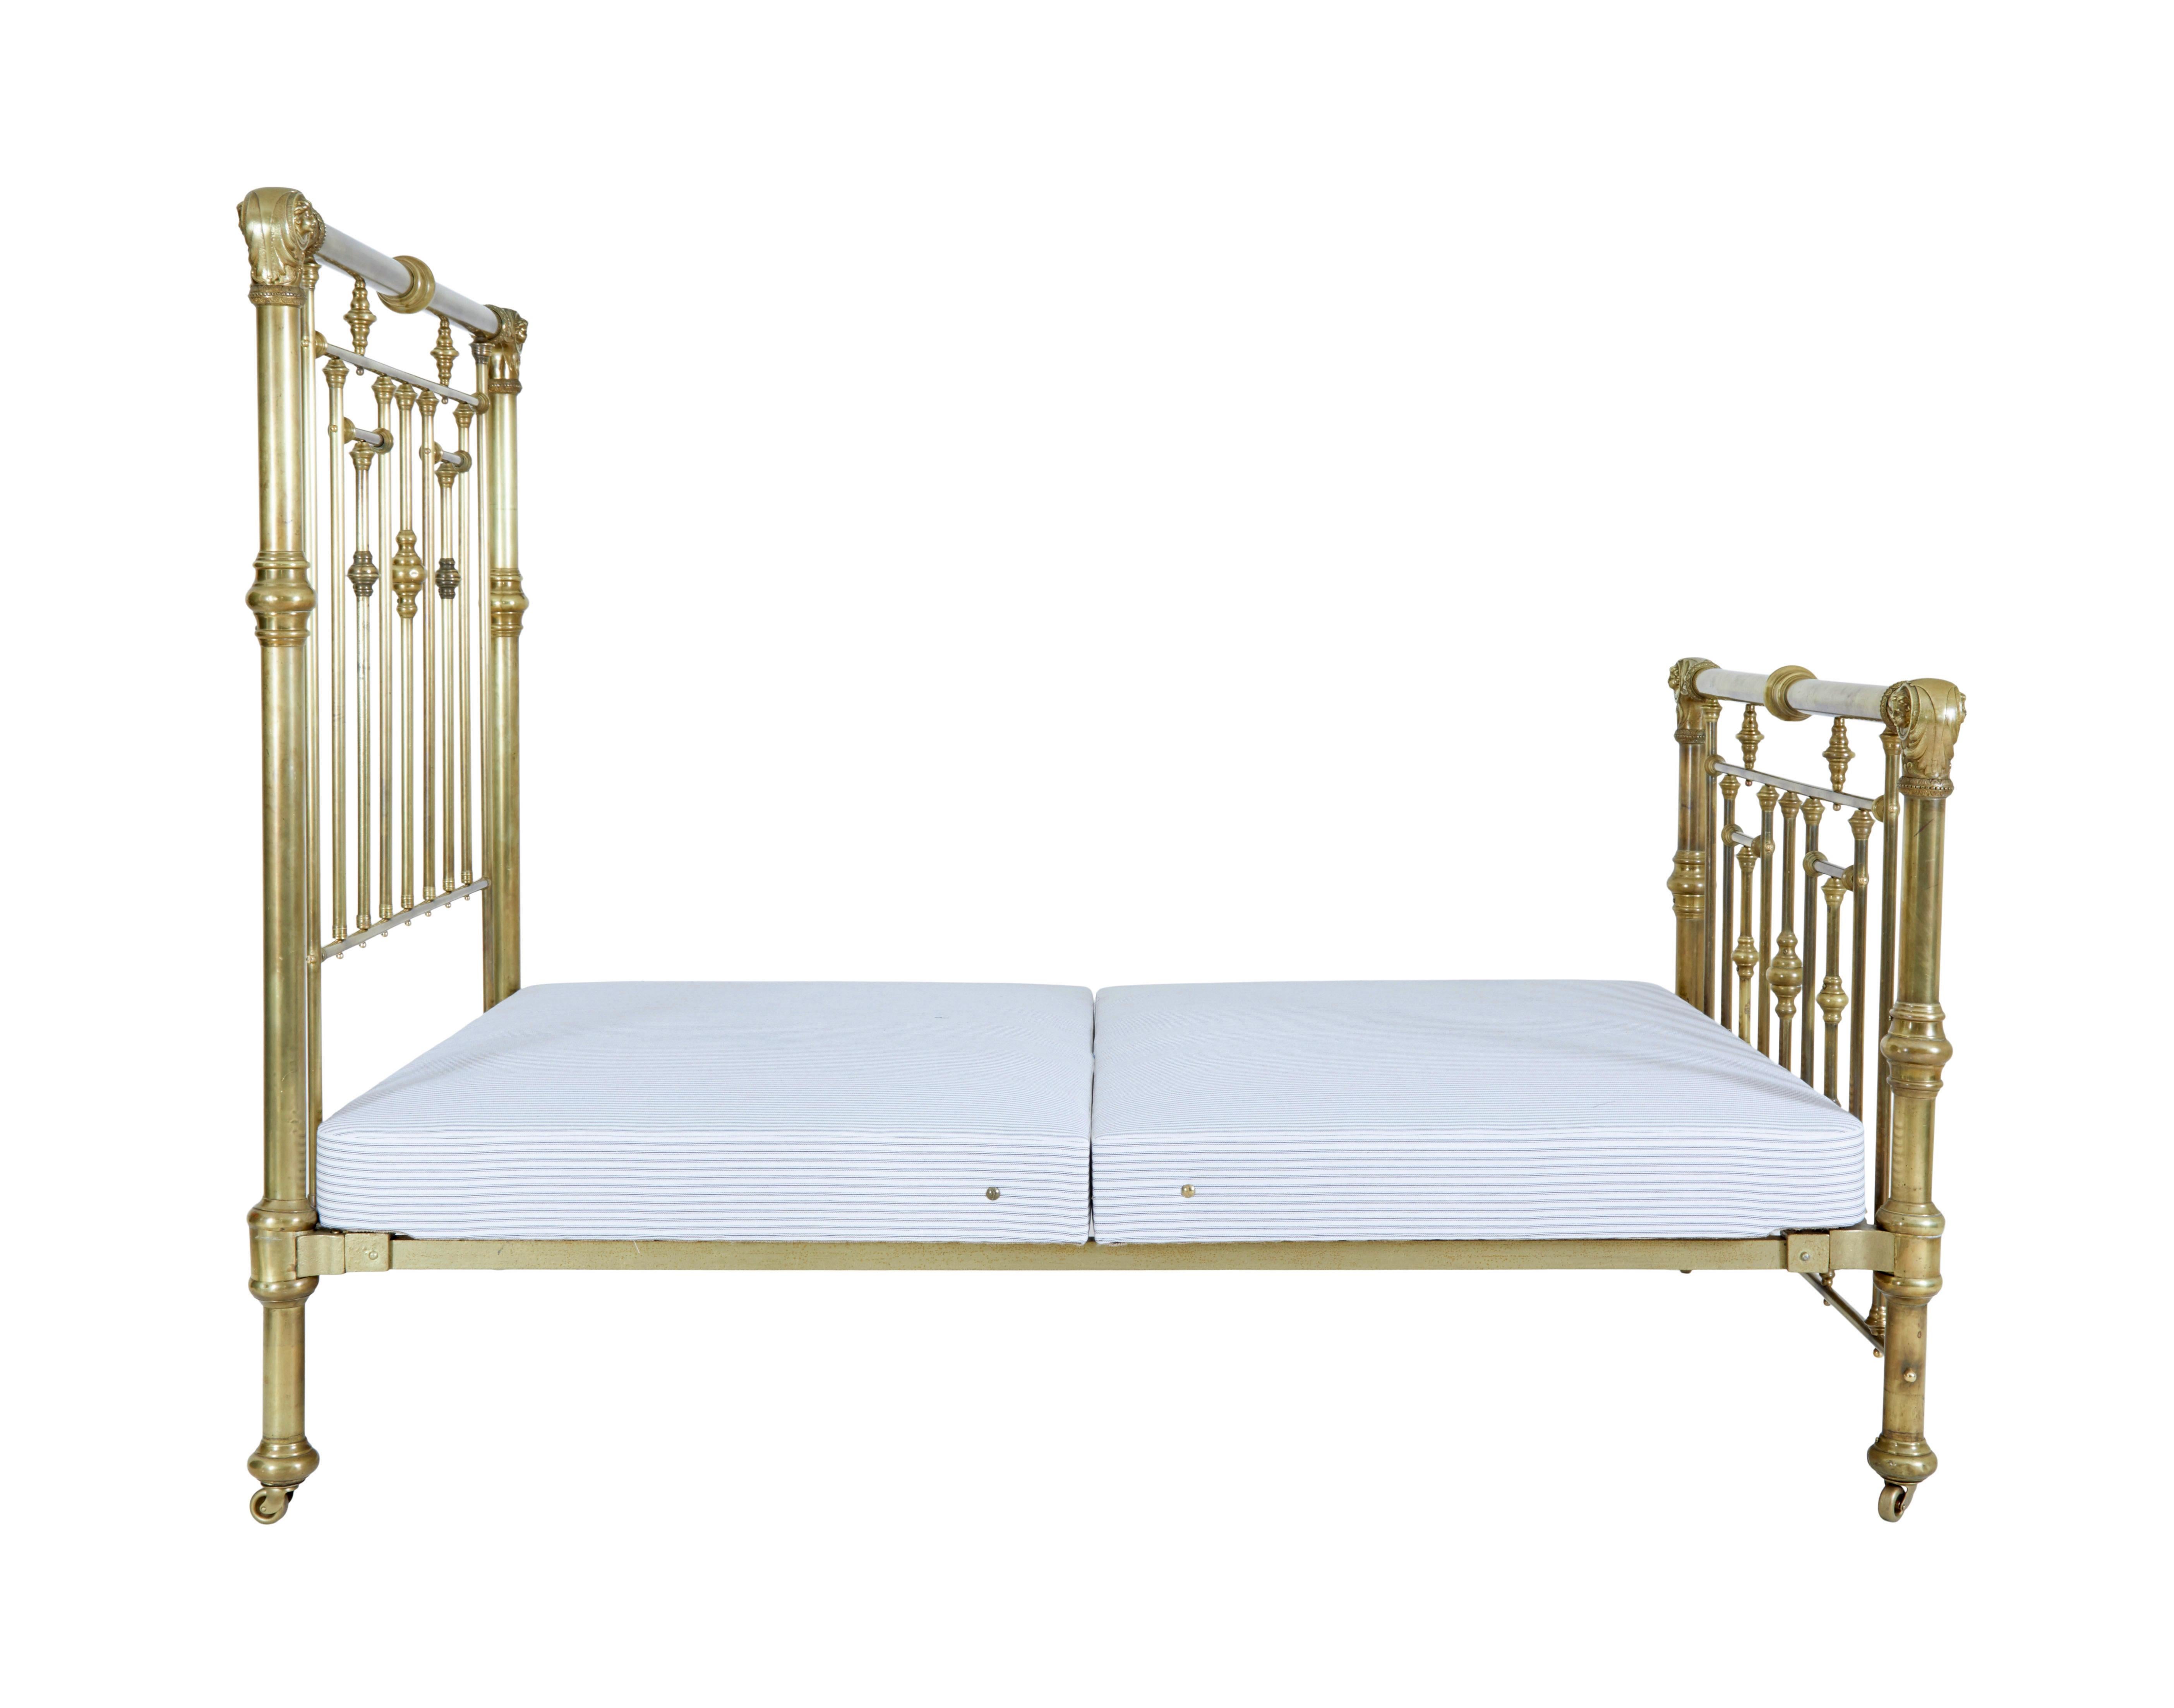 Cast American 19th Century Ornate Brass Double Bed For Sale